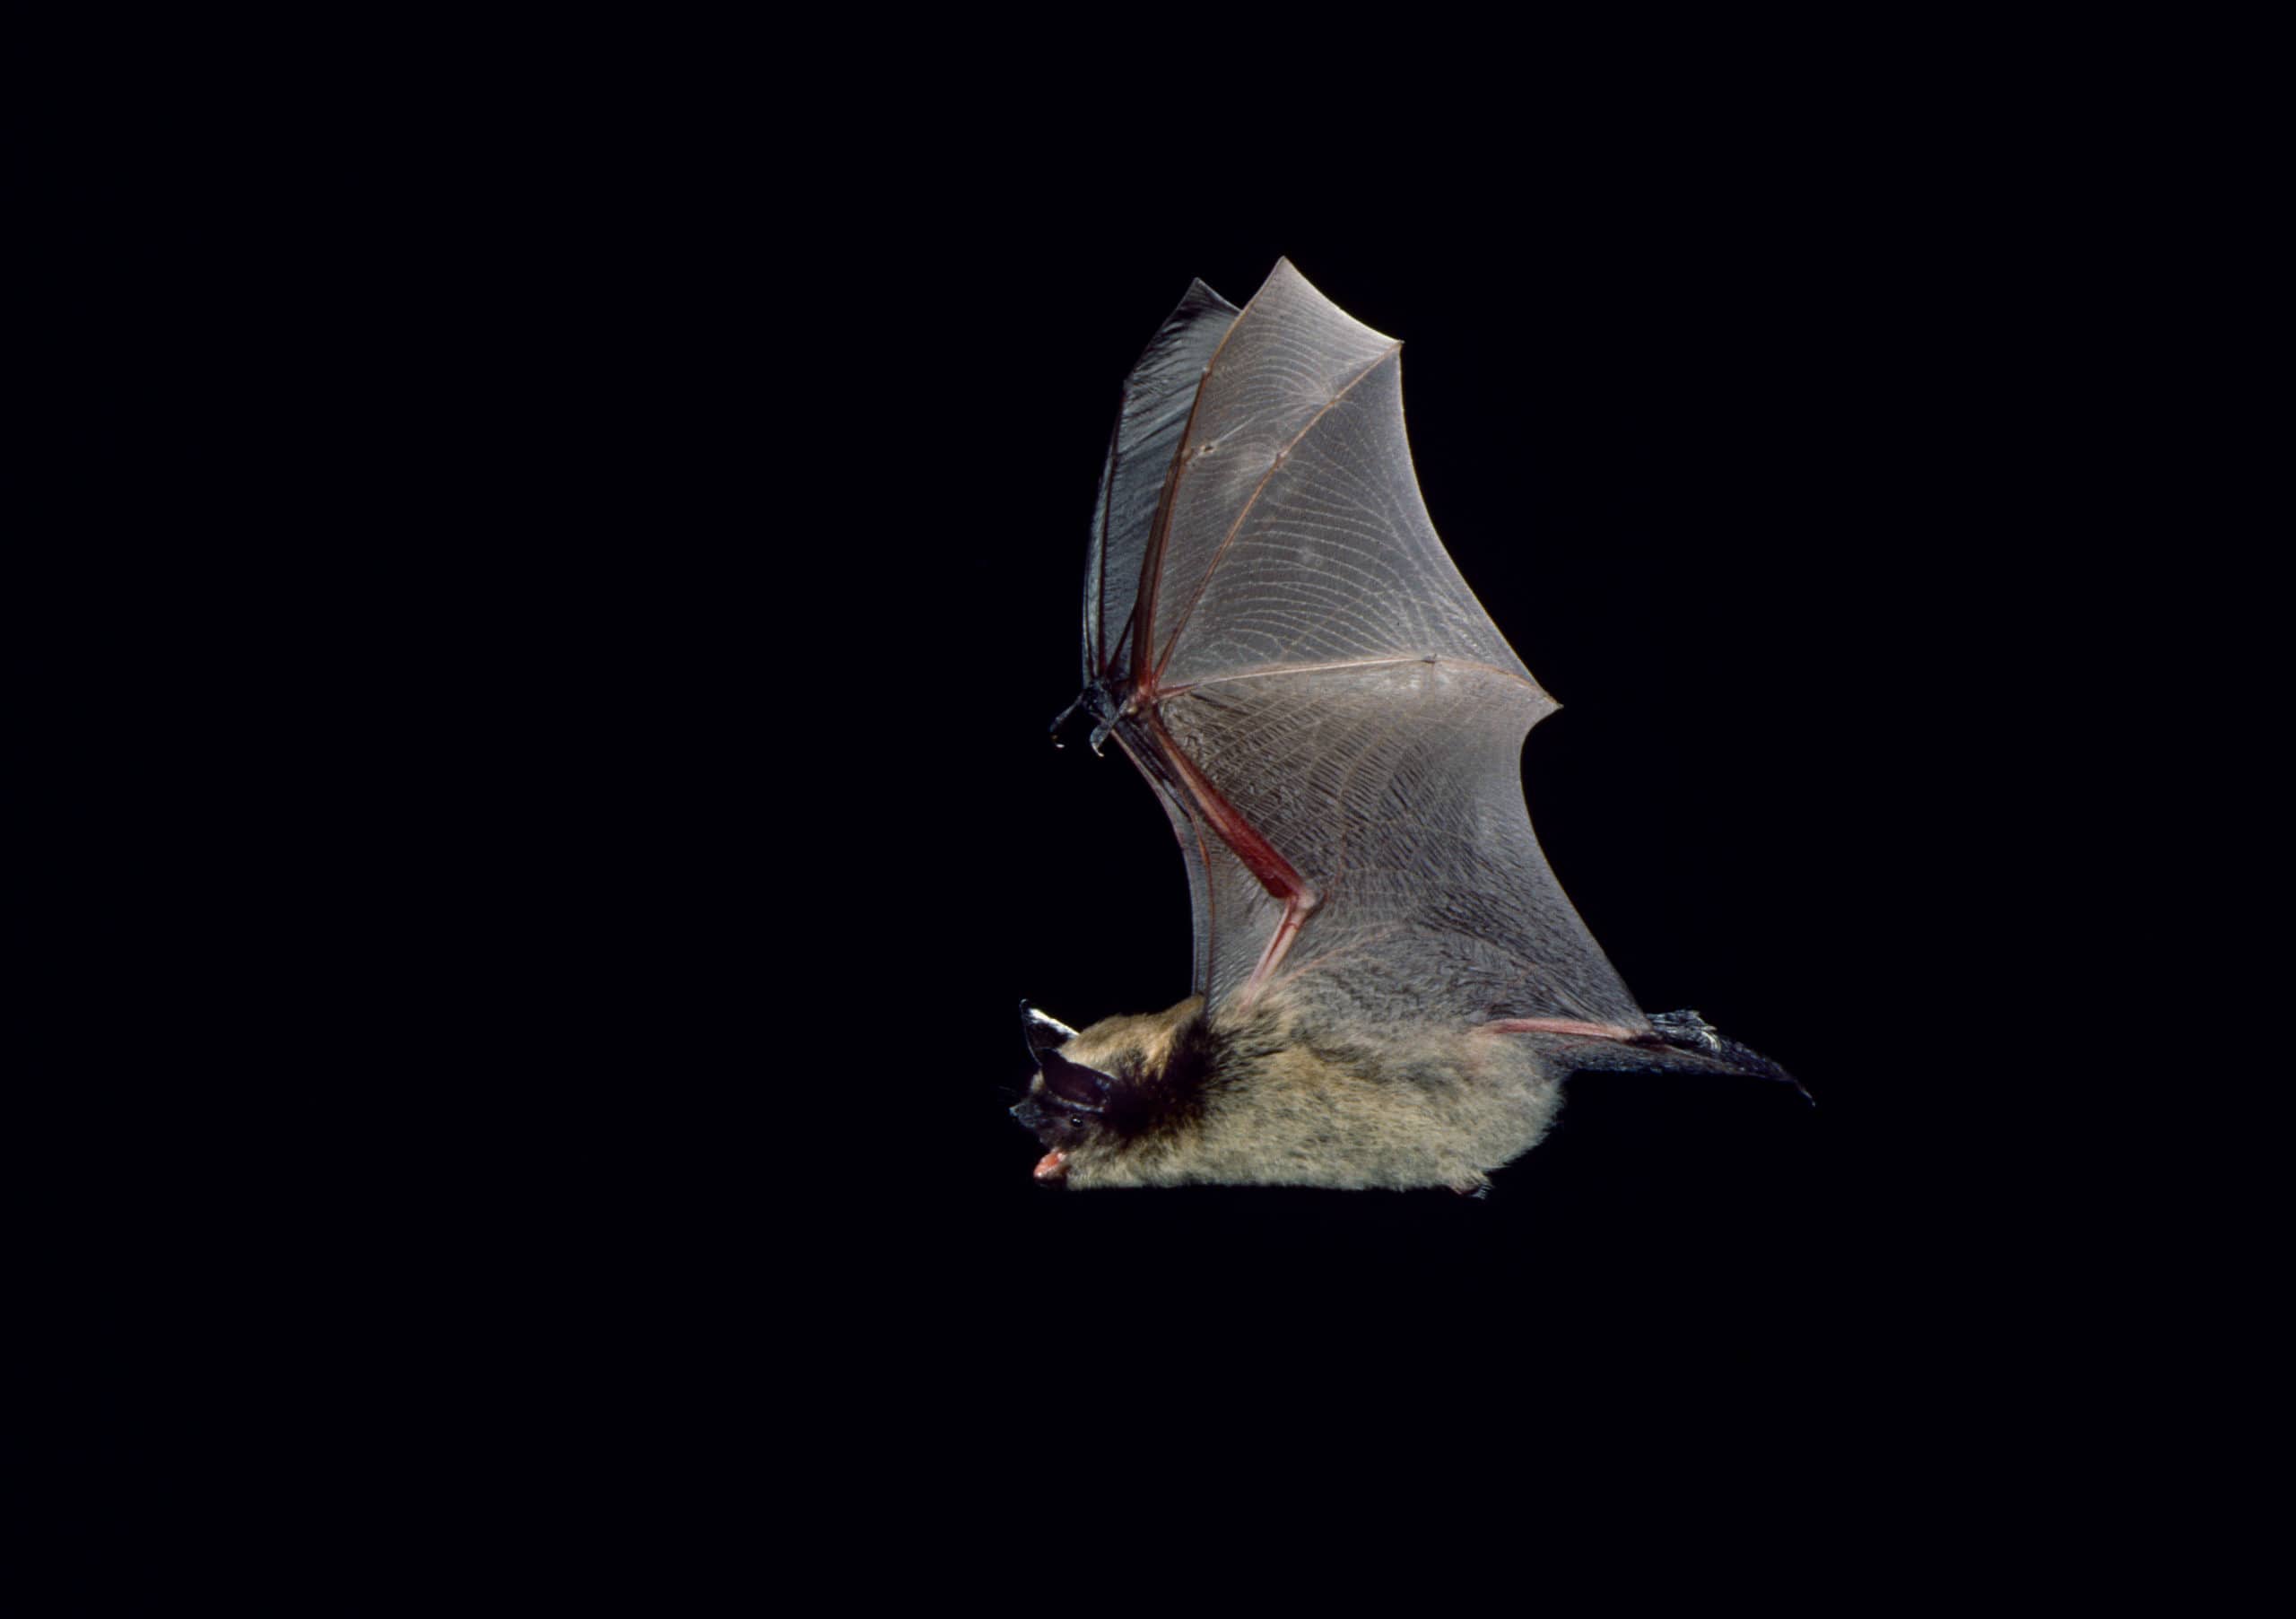 Bats and Mosquito Control - Merlin Tuttle's Bat Conservation